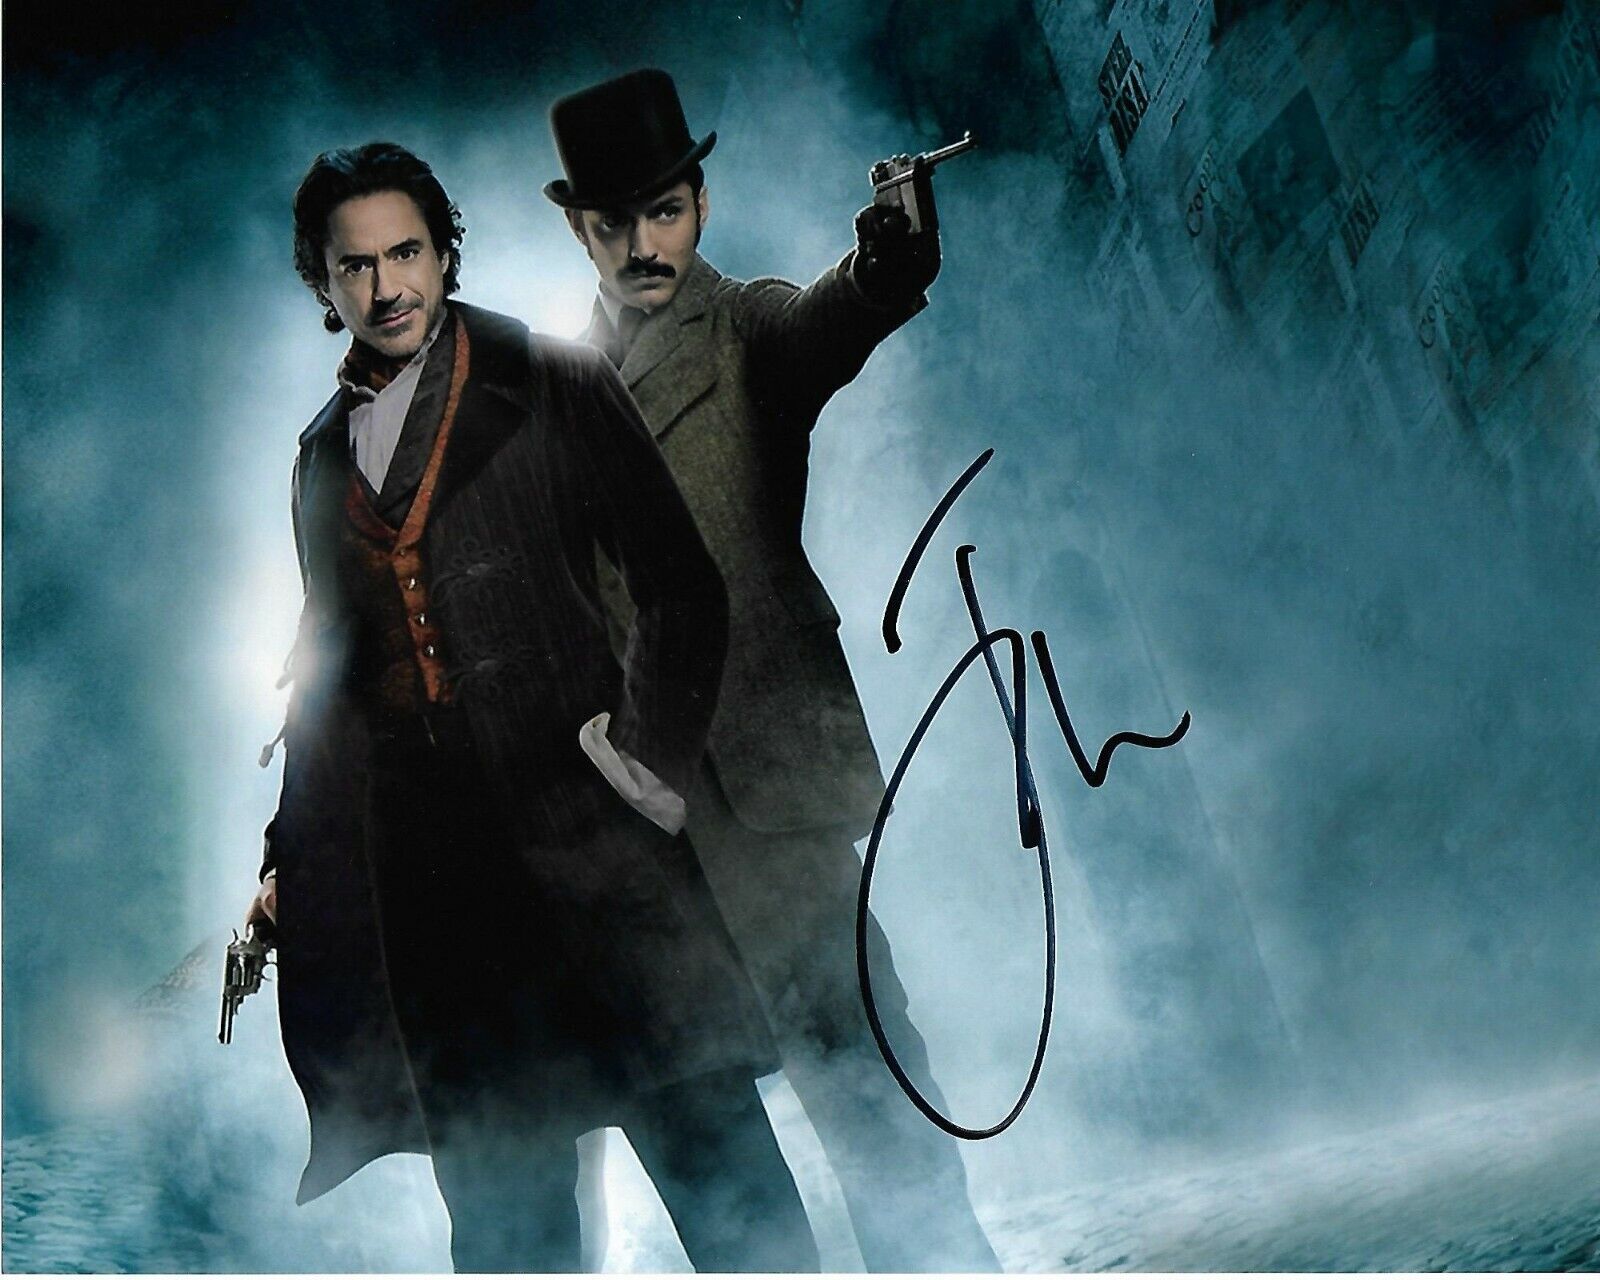 Jude Law sherlock holmes authentic hand signed autograph Photo Poster painting AFTAL COA (JL-1)